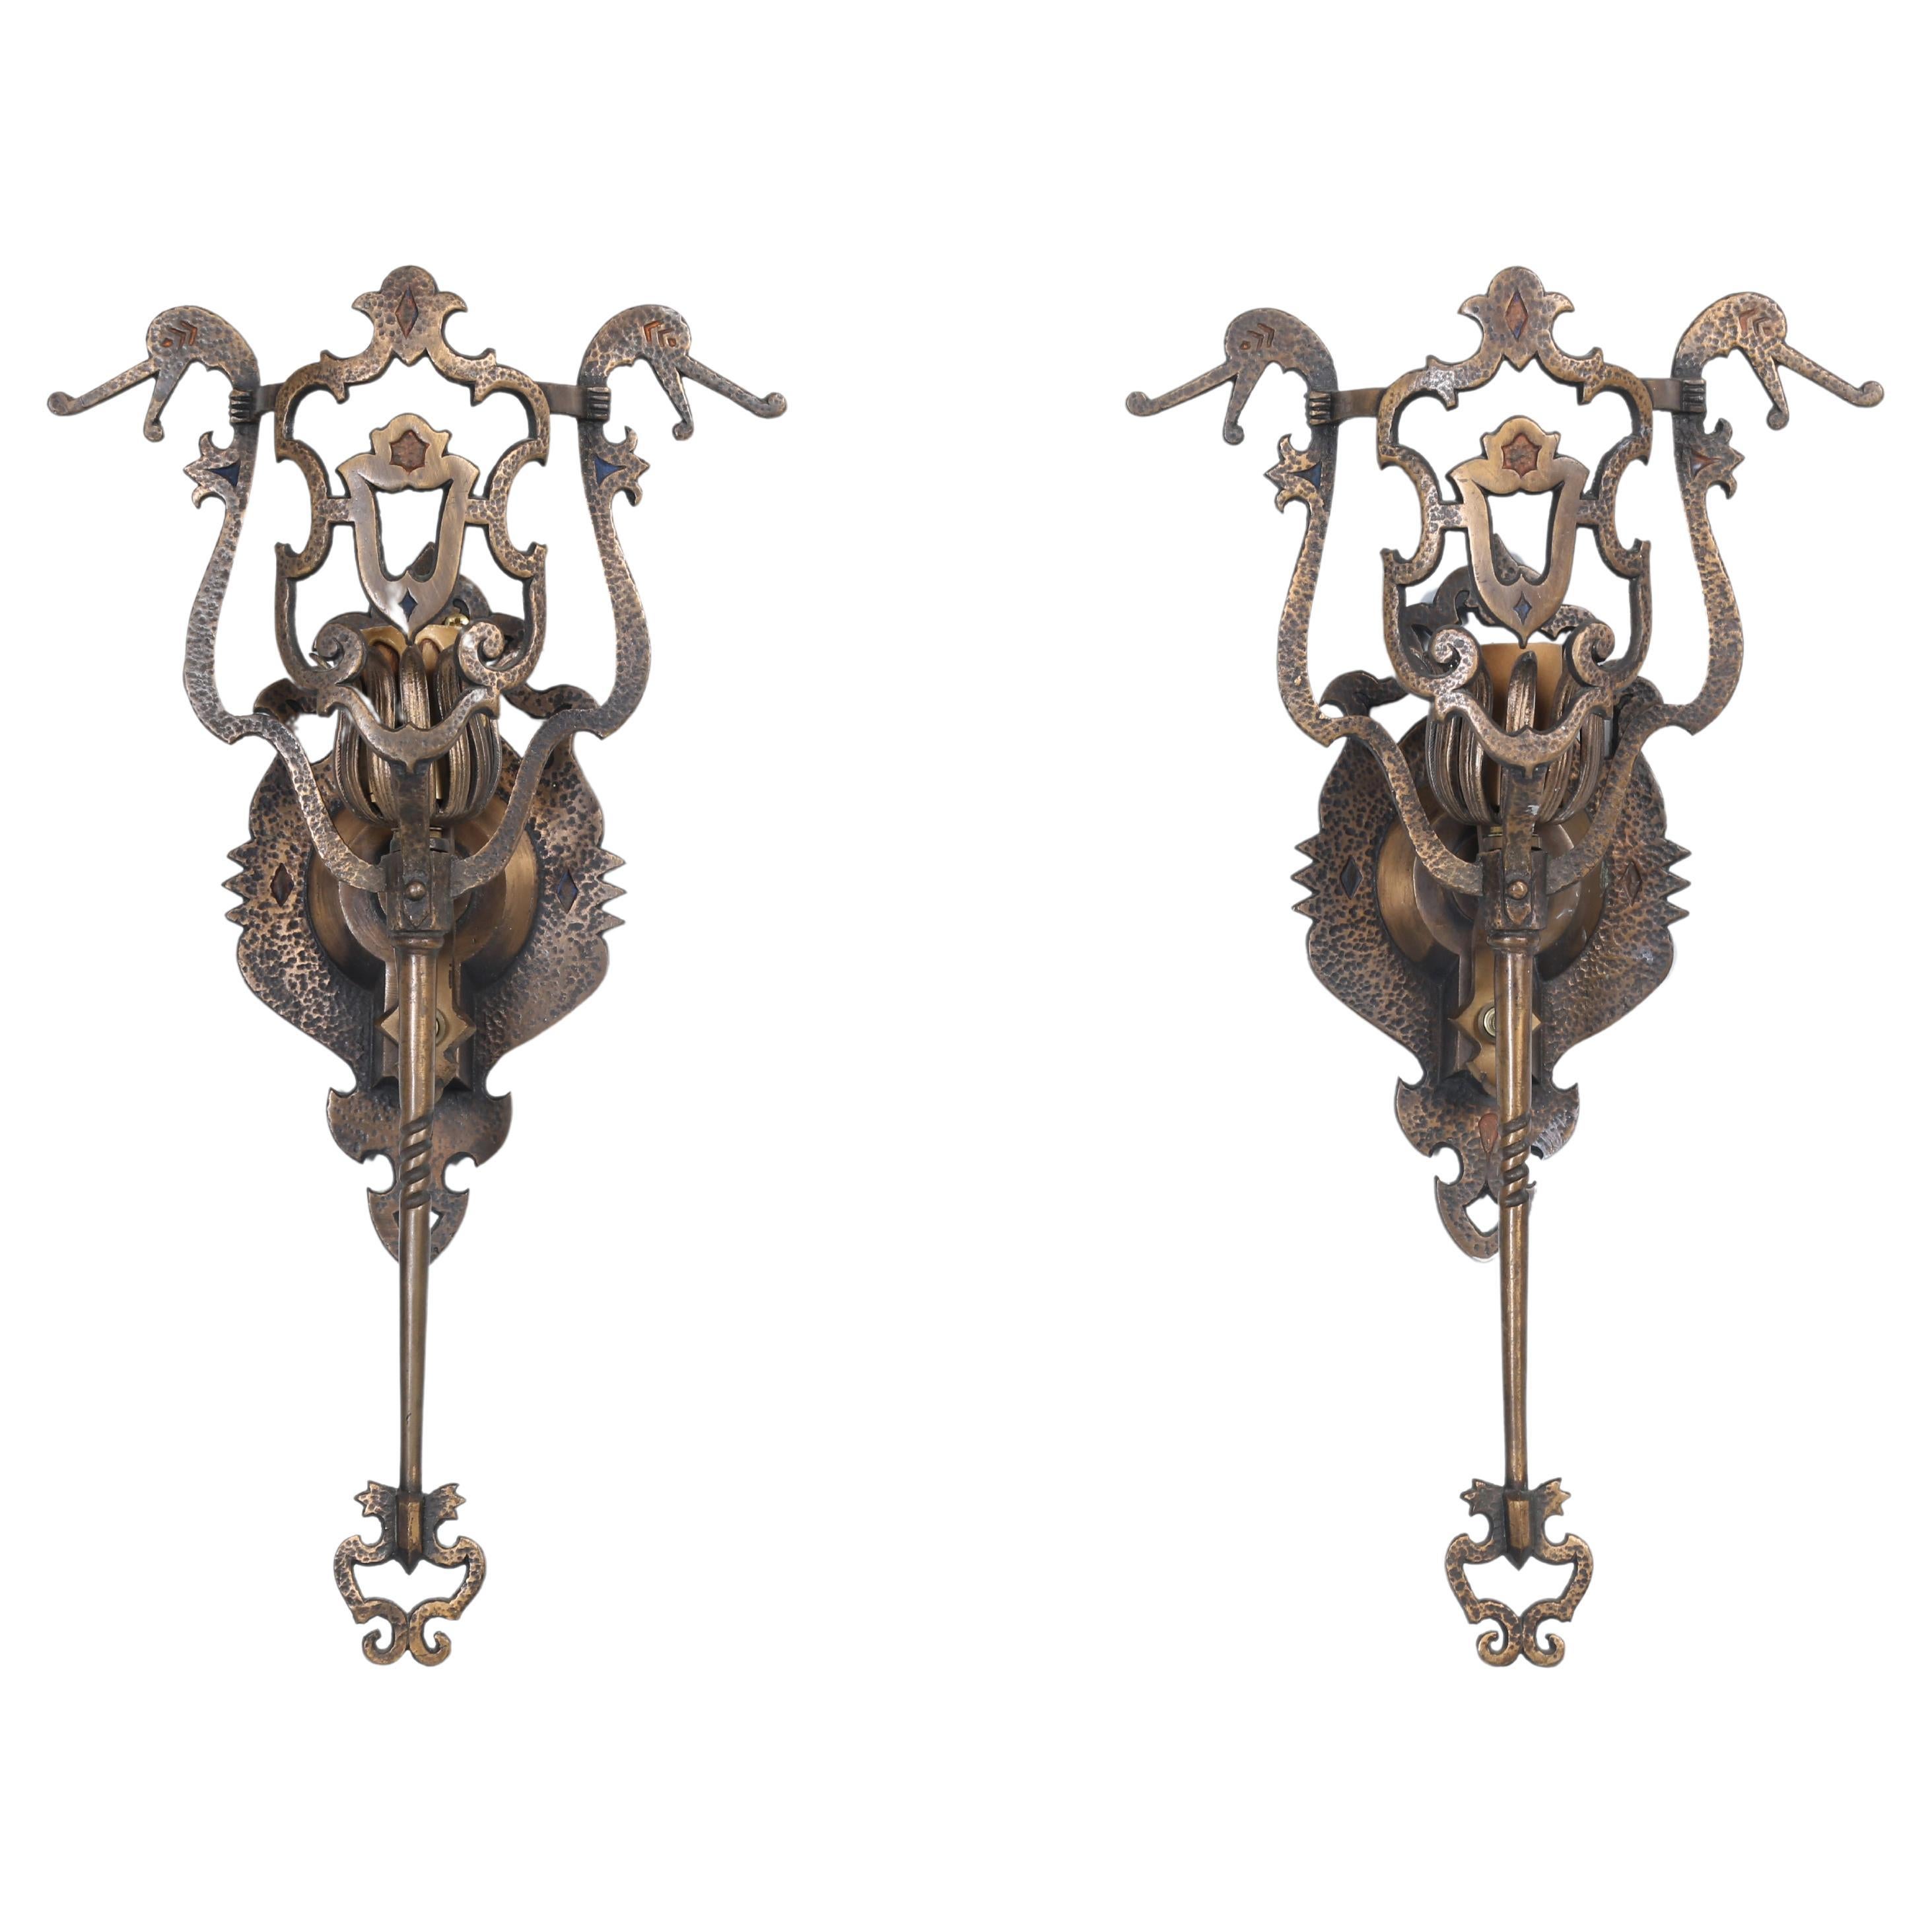 Pair of Hand-Made Heavy Brass Sconces Removed from c1908 Historic Illinois Home